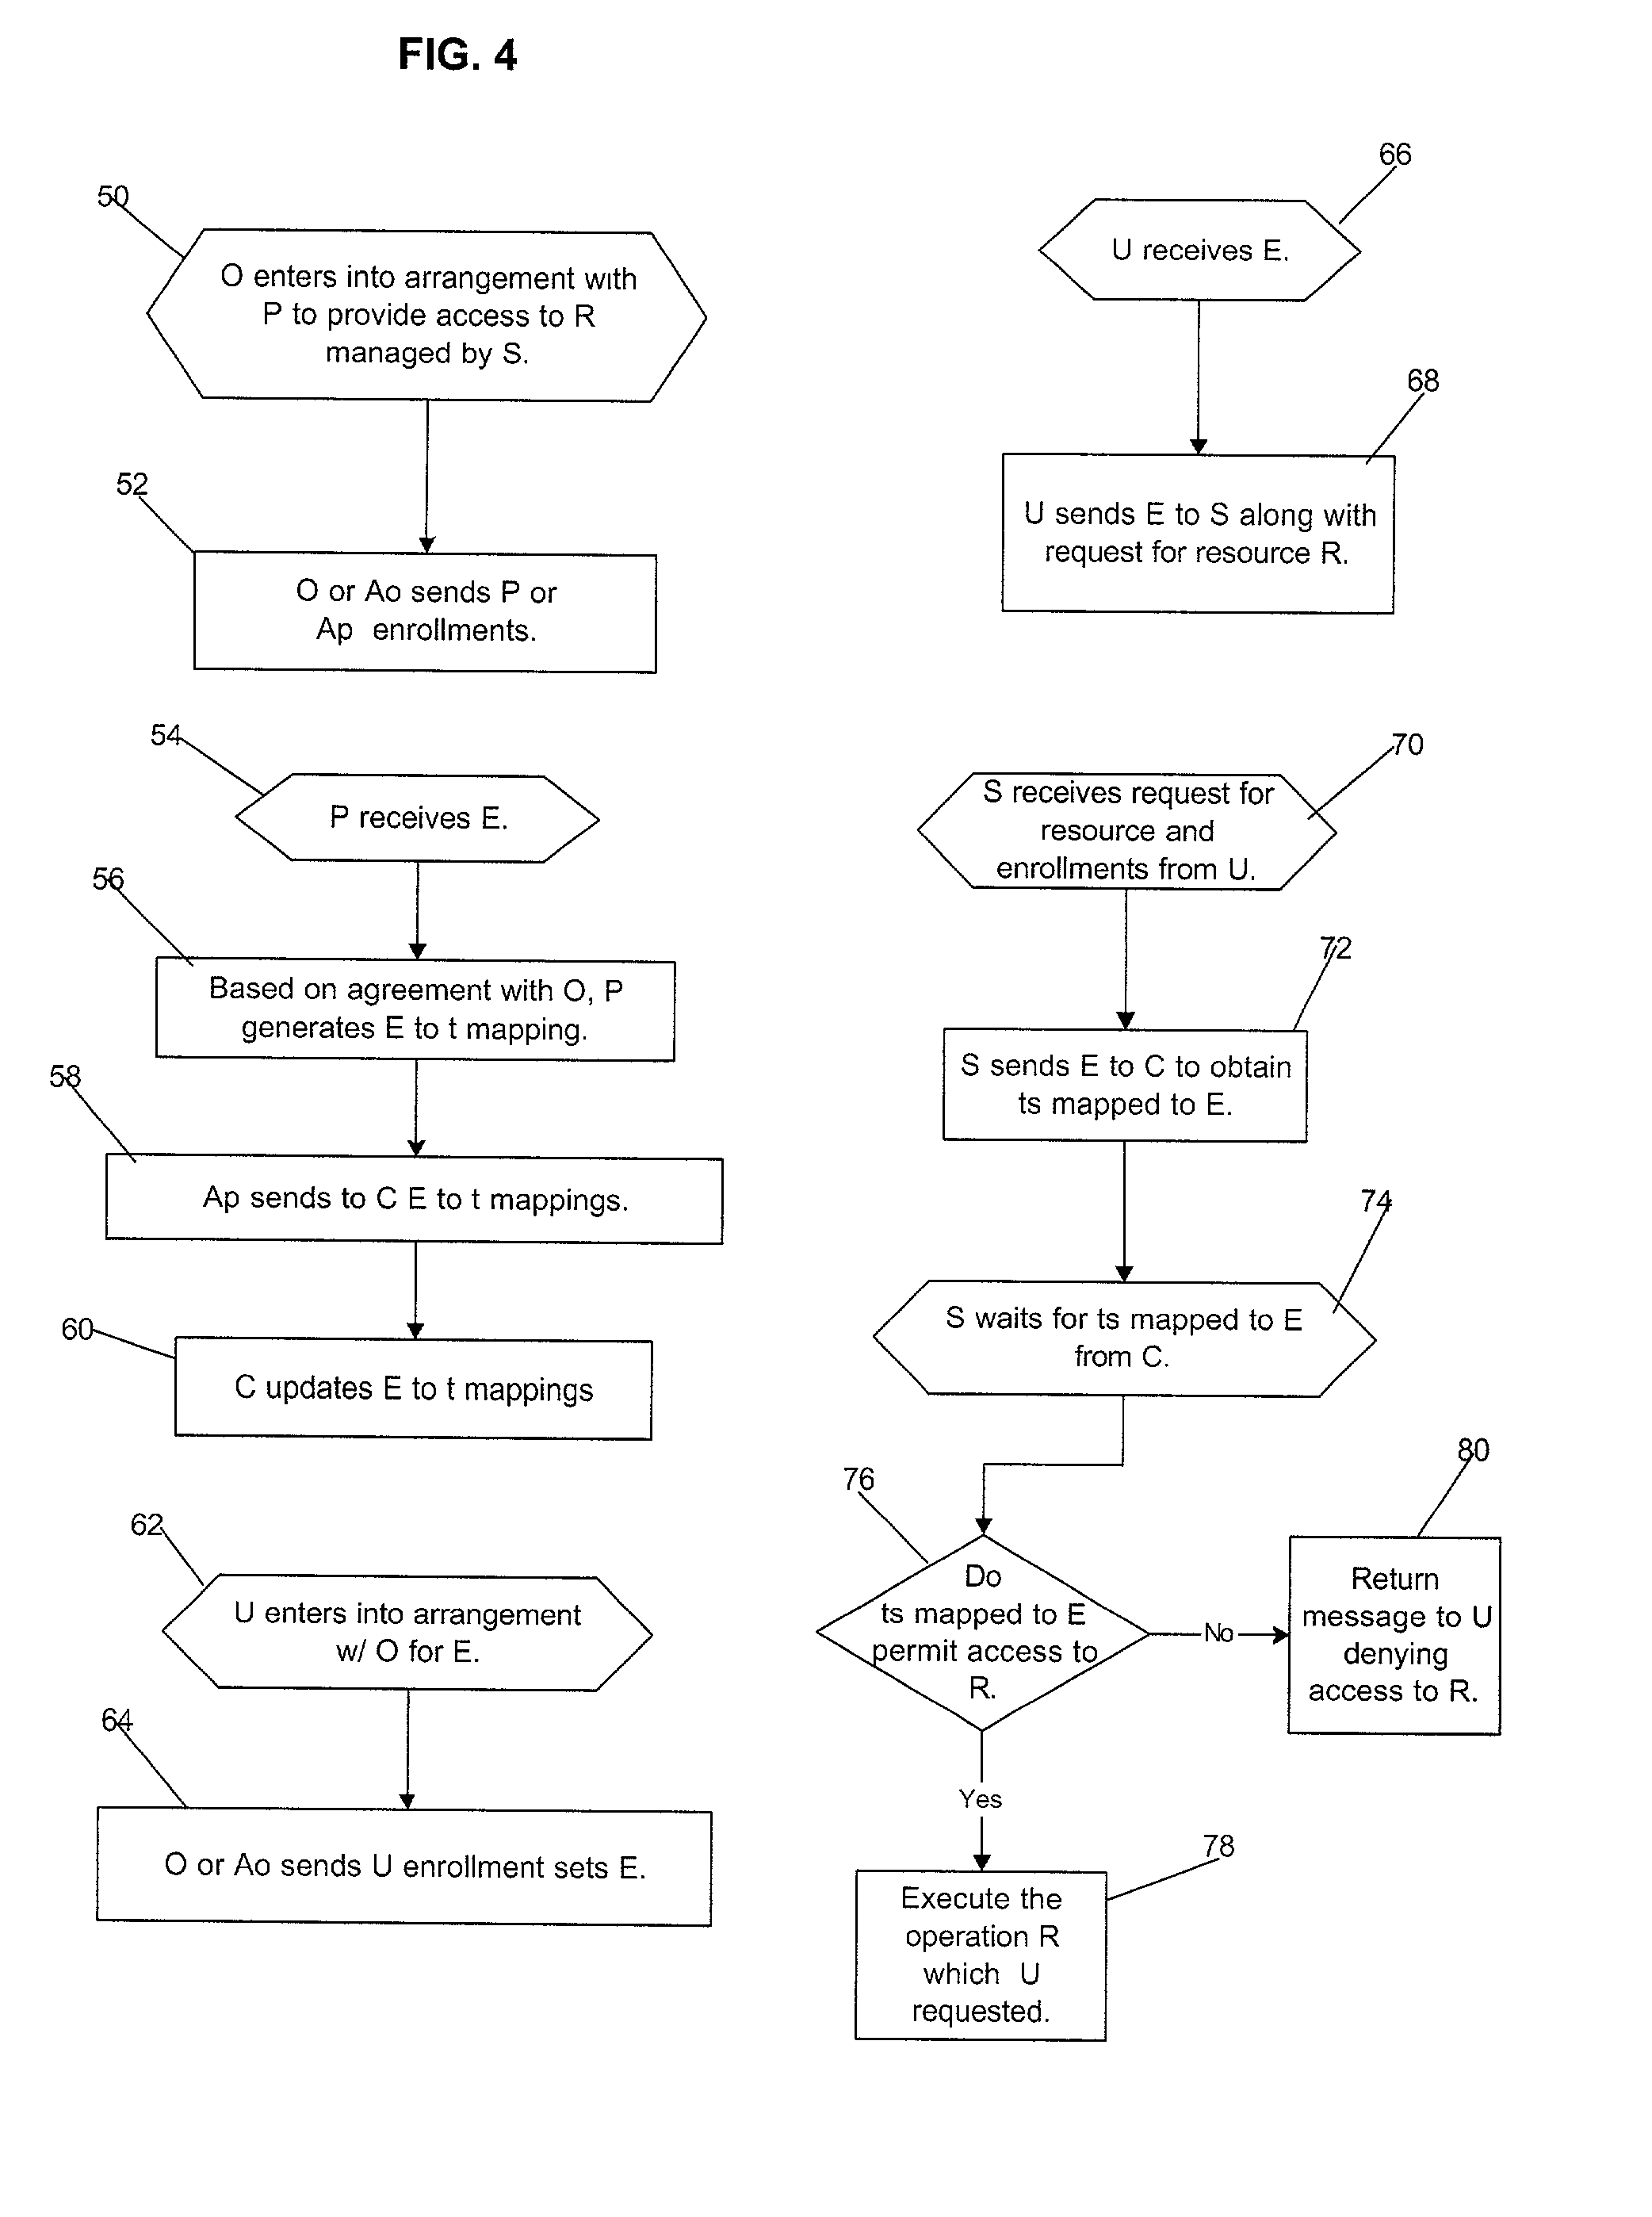 Umethod, system and program for managing relationships among entities to exchange encryption keys for use in providing access and authorization to resources